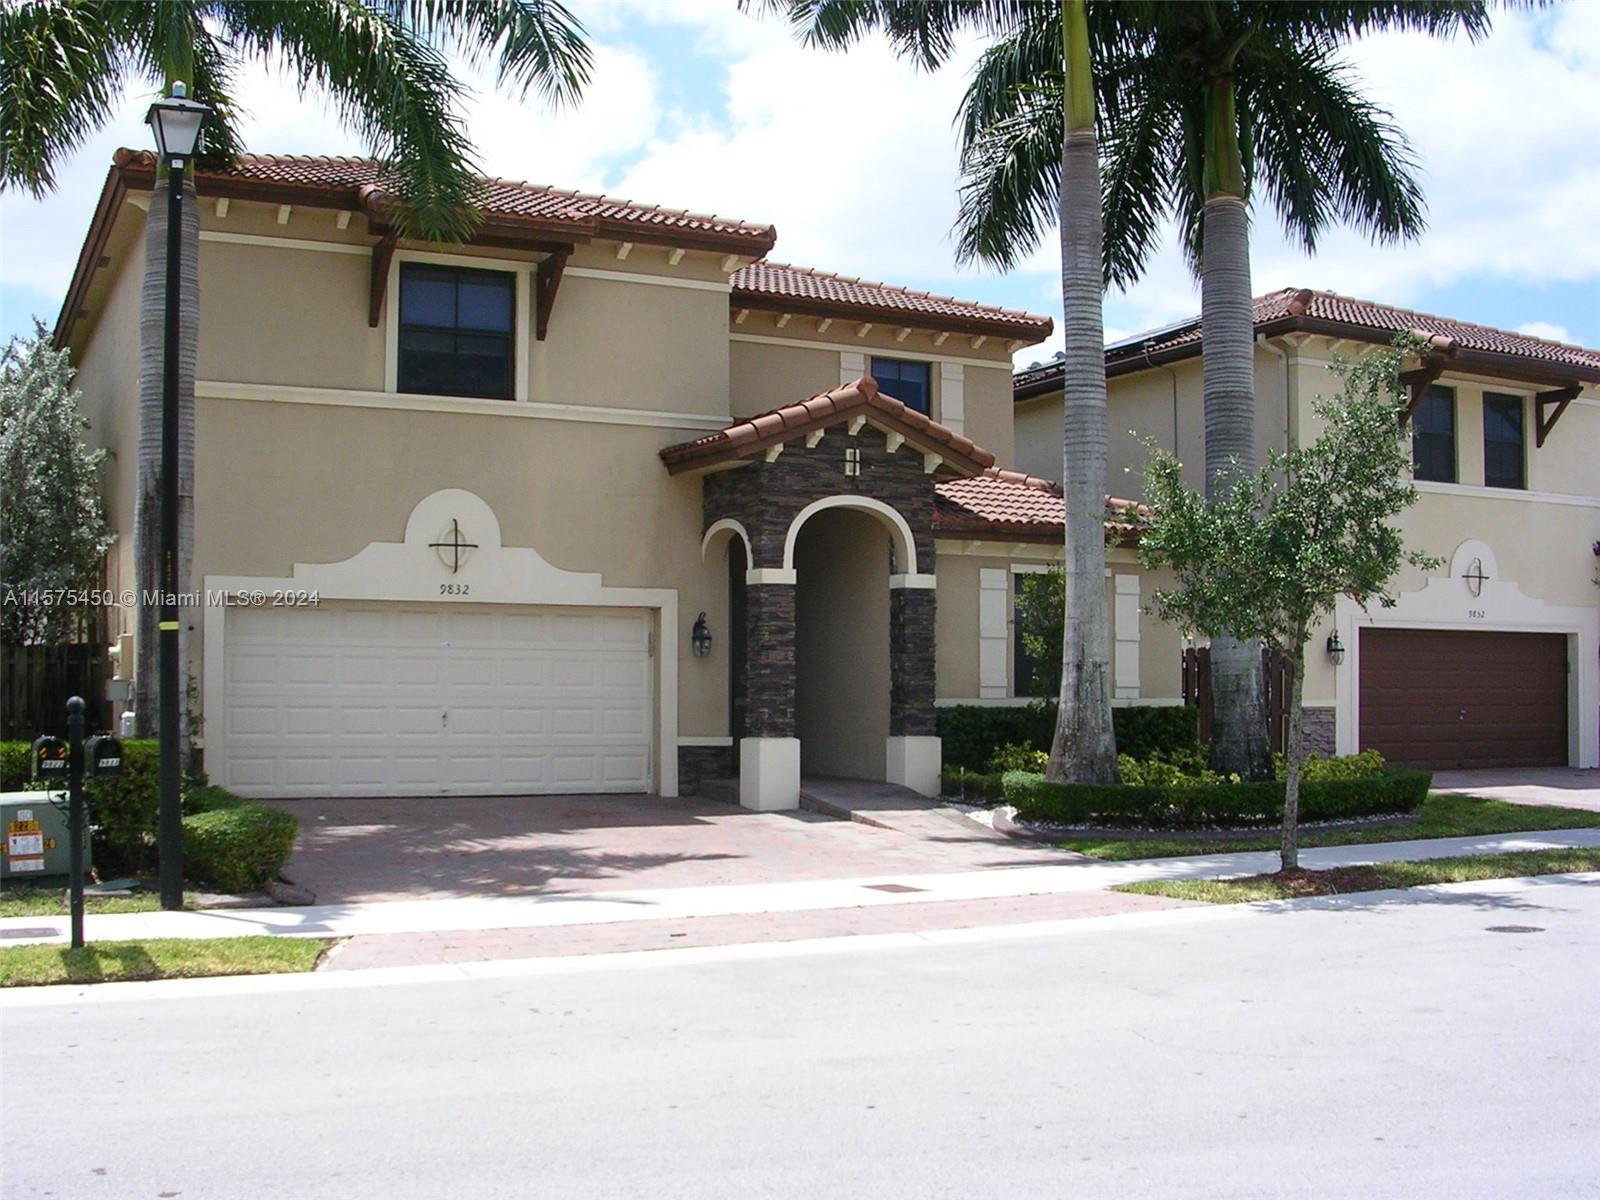 Single family home sophisticated and elegant in the heart of Doral at prestigious Grand Bay Estate. 